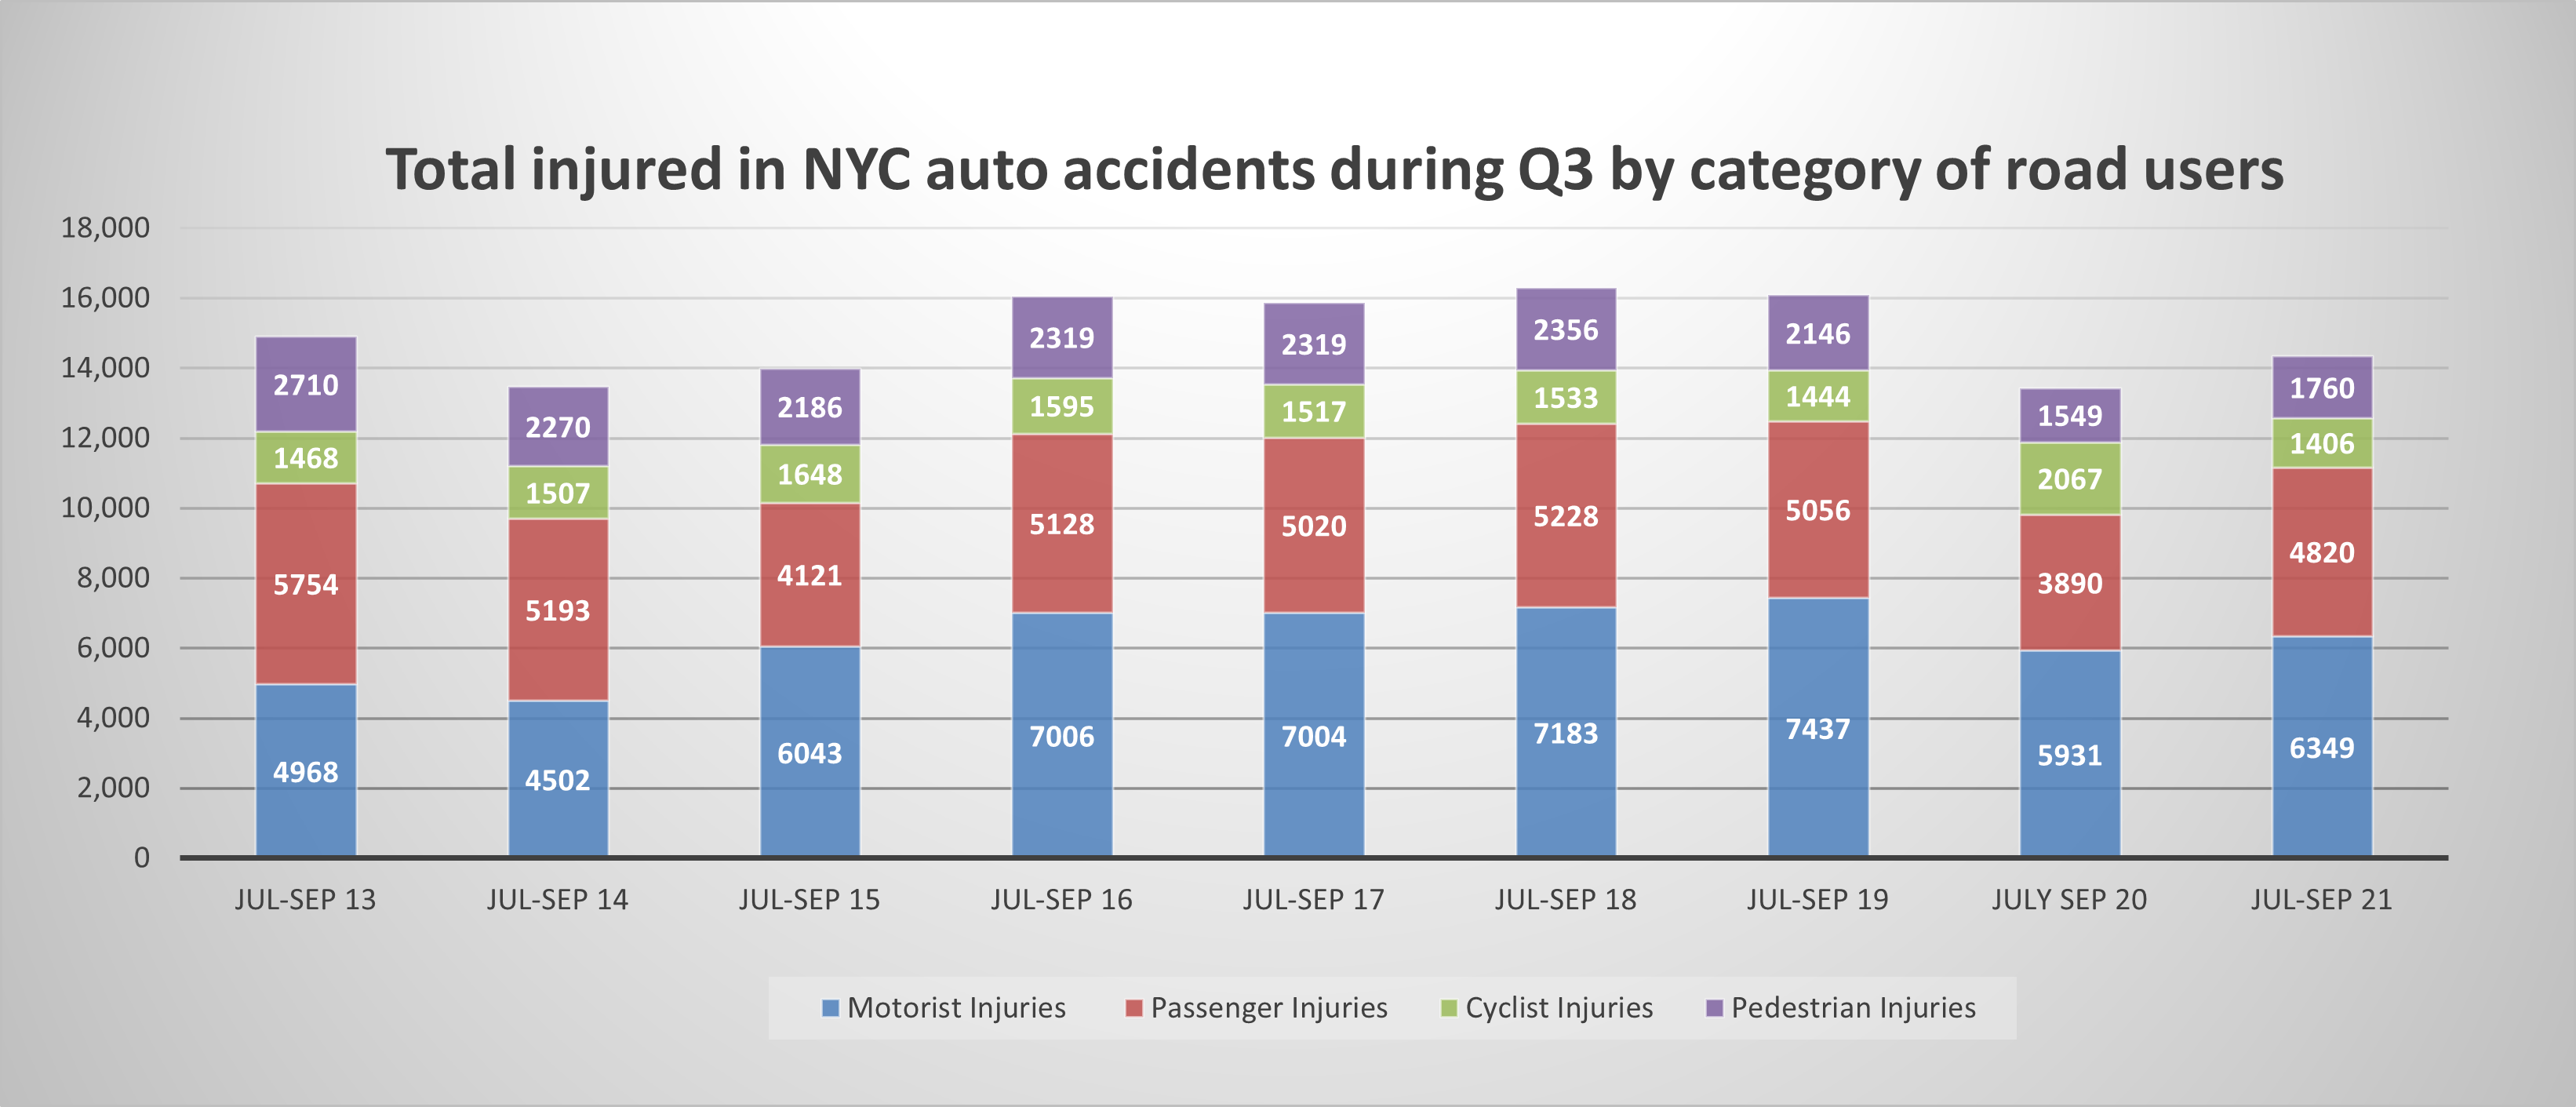 New York Auto Accident injuries by category during Q3